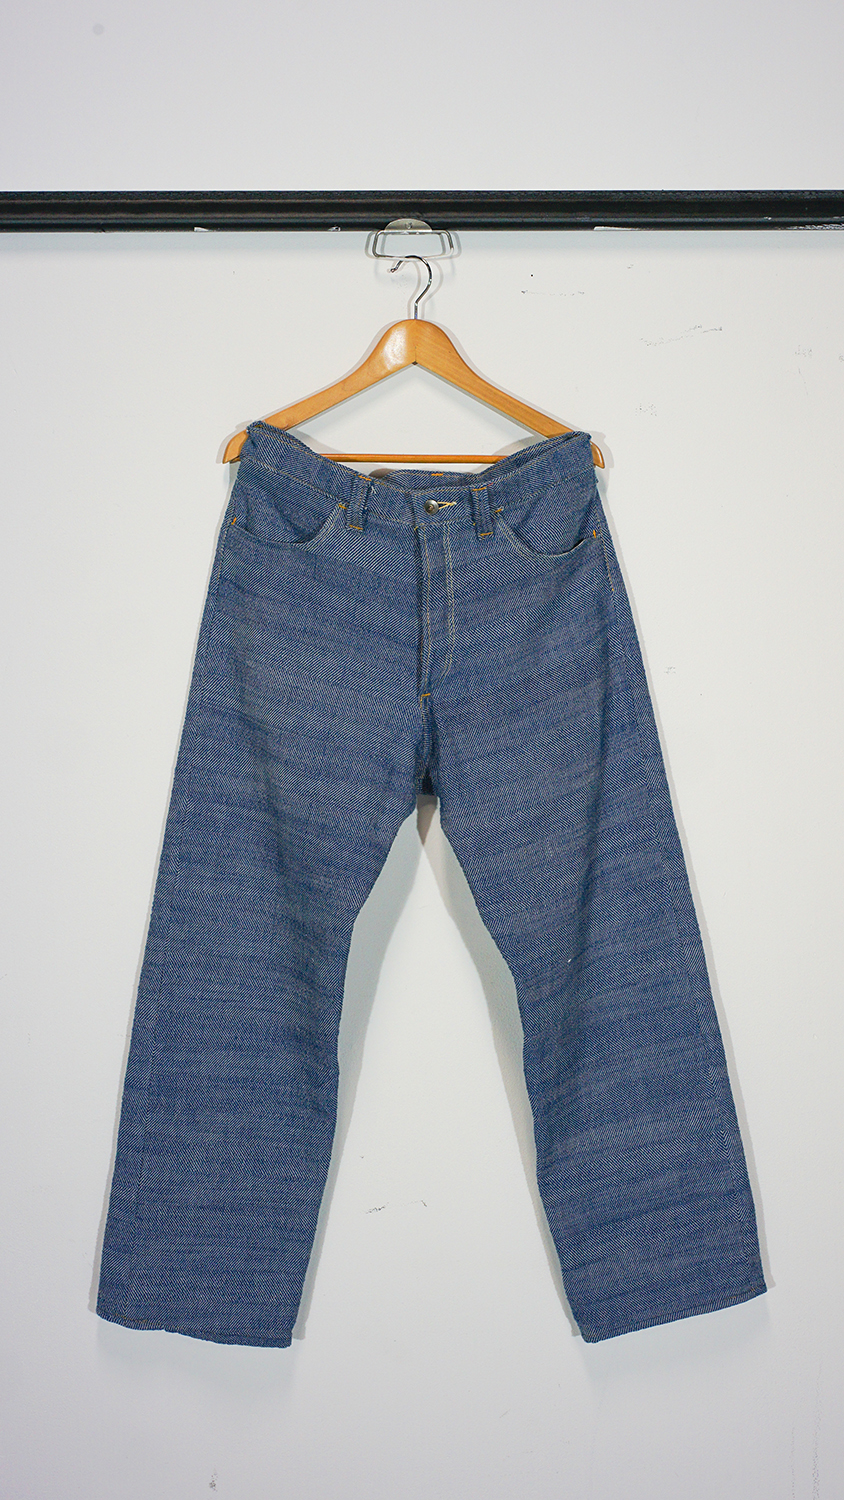 Hand woven star jeans